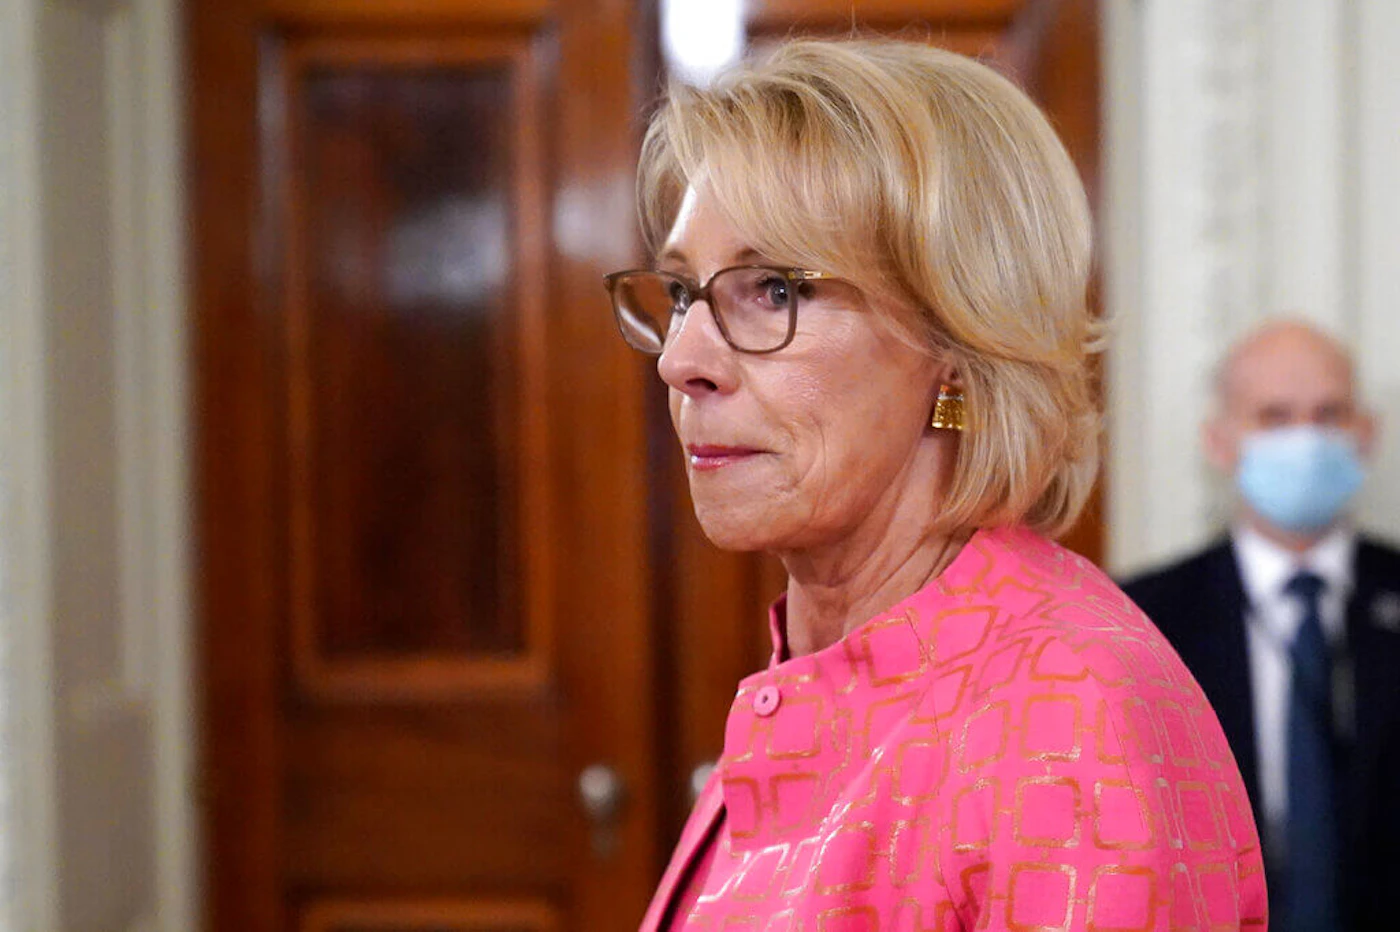 Education Secretary Betsy DeVos arrives for an event in the State Dining room of the White House, Wednesday, Aug. 12, 2020, in Washington. A federal judge on Wednesday allowed the Education Department to move forward with new rules governing how schools and universities respond to complaints of sexual assault. (AP Photo/Andrew Harnik, File)